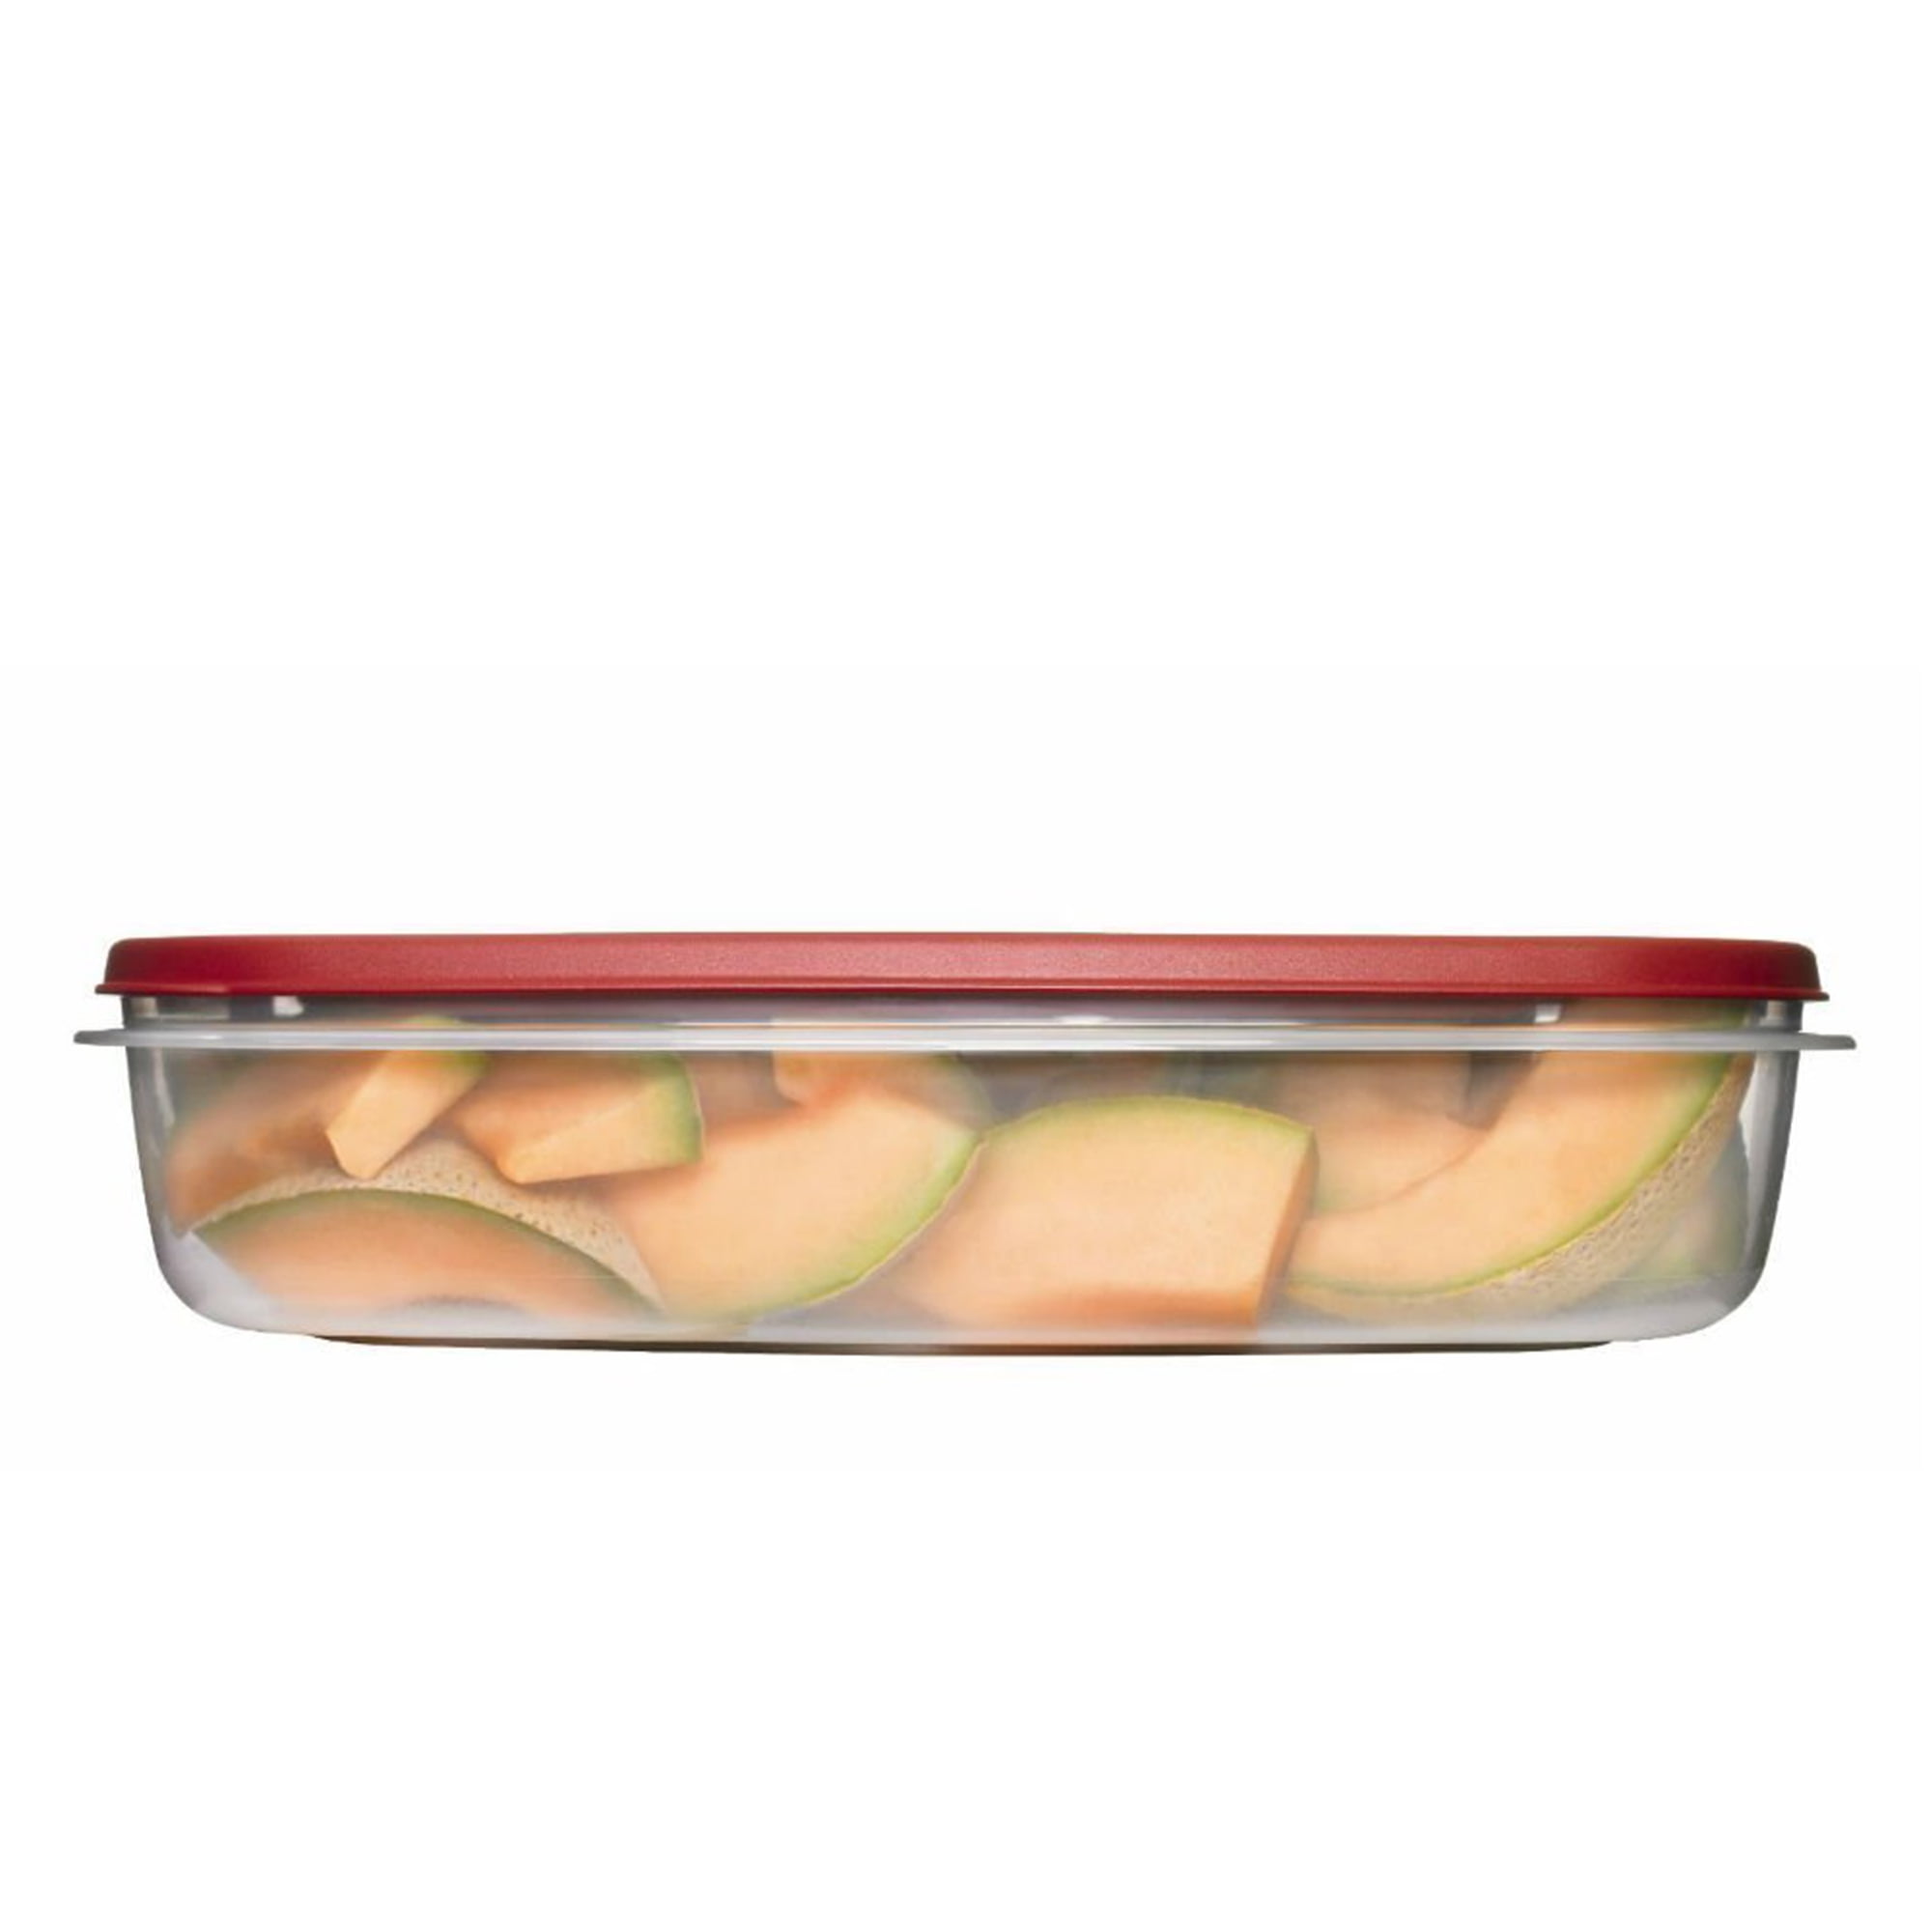 Rubbermaid storage container 1.5 gallon - general for sale - by